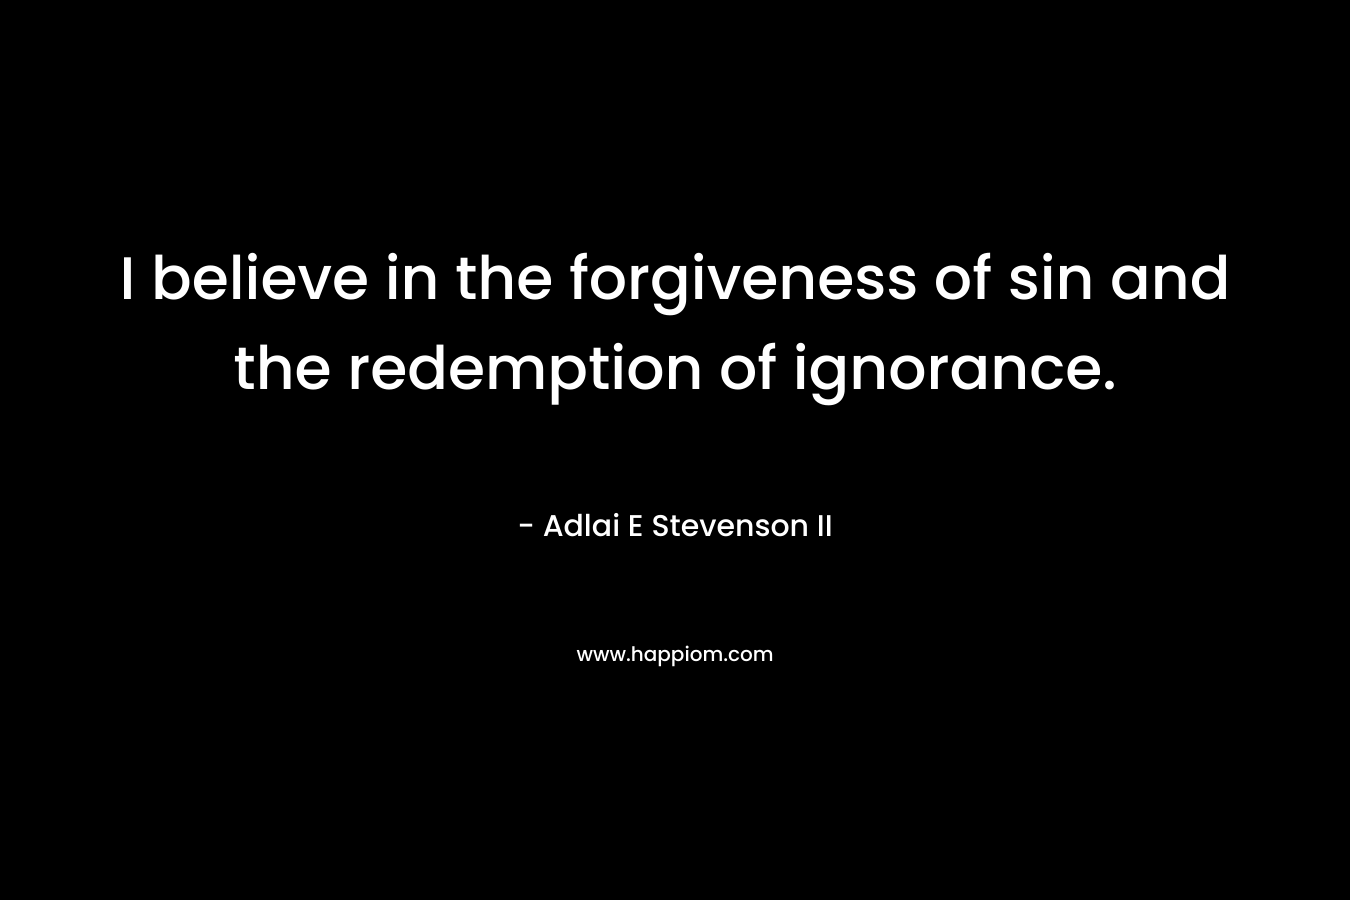 I believe in the forgiveness of sin and the redemption of ignorance. – Adlai E Stevenson II